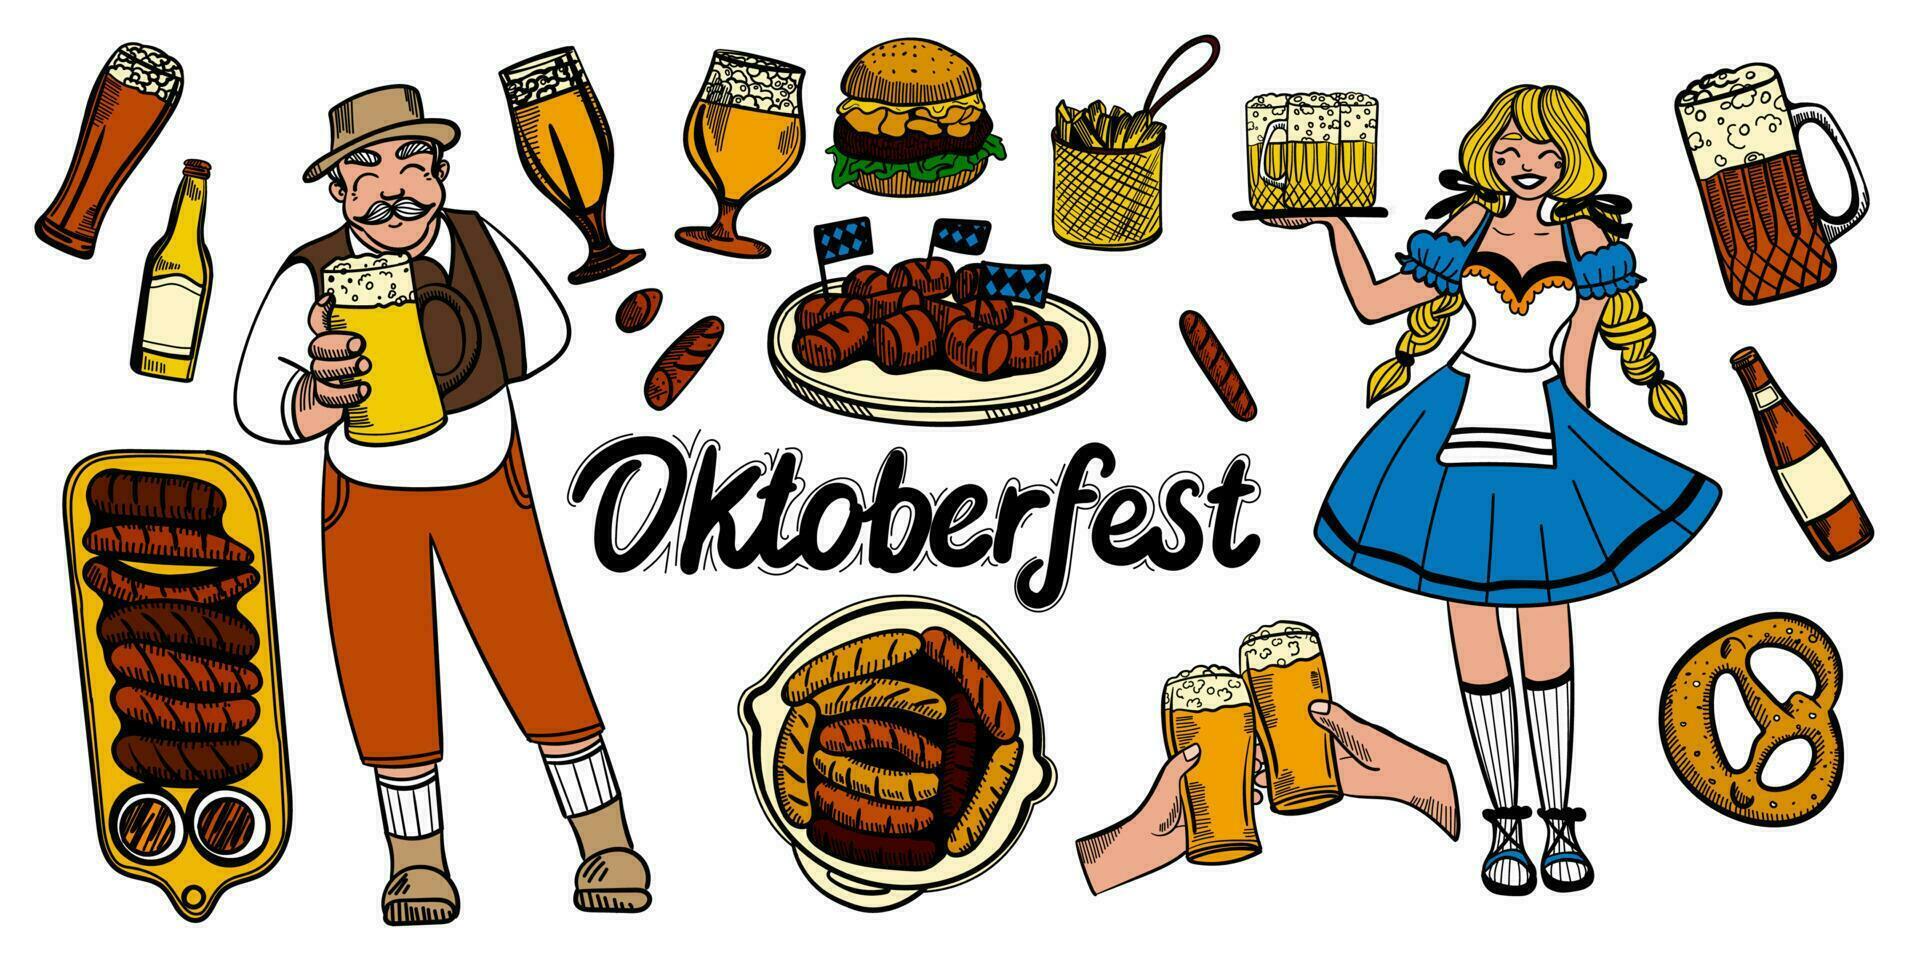 Oktoberfest food and symbols collection. Vector Oktoberfest objects and icons with lettering inscription Welcome to Oktoberfest. Beer, hat, meat,, hot dog, sausages, etc.